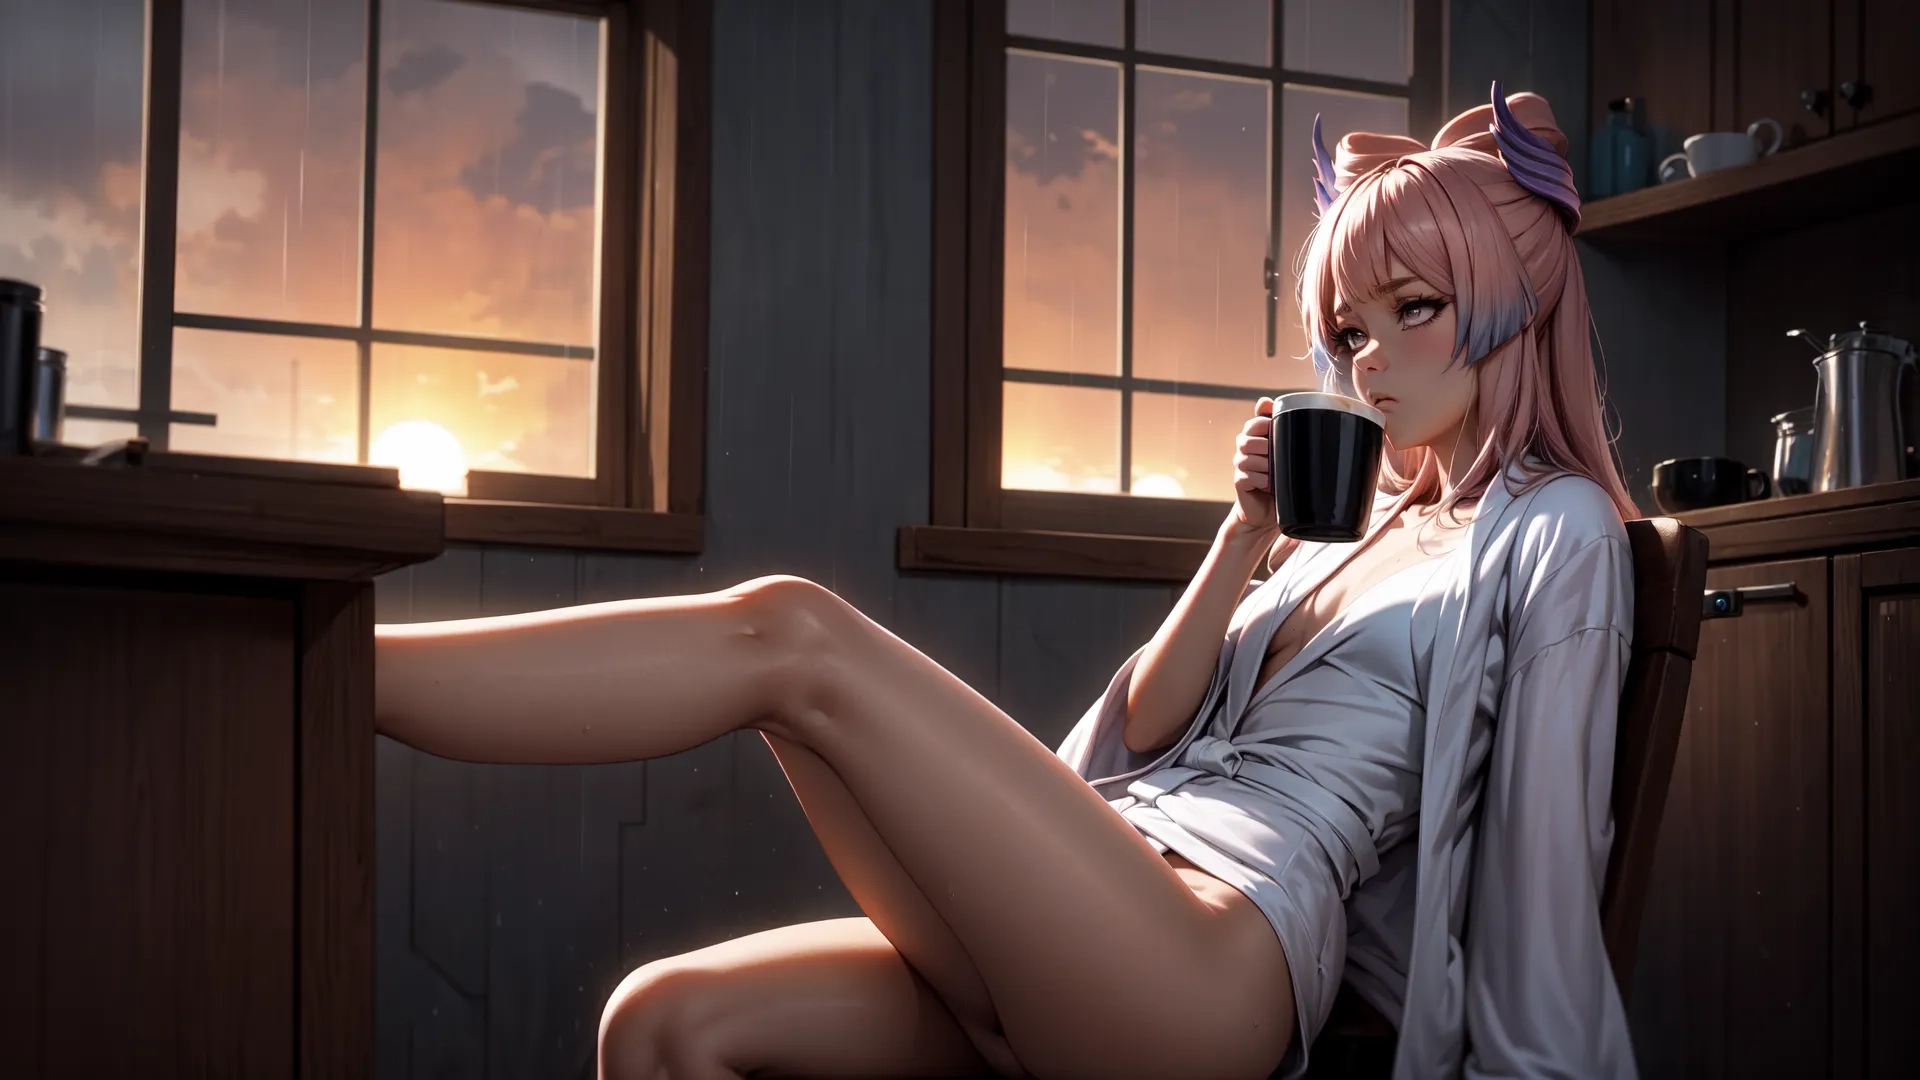 the woman is sitting beside the window drinking from a cup and a mug in her hand, with sunset out of the window behind her is reflected
